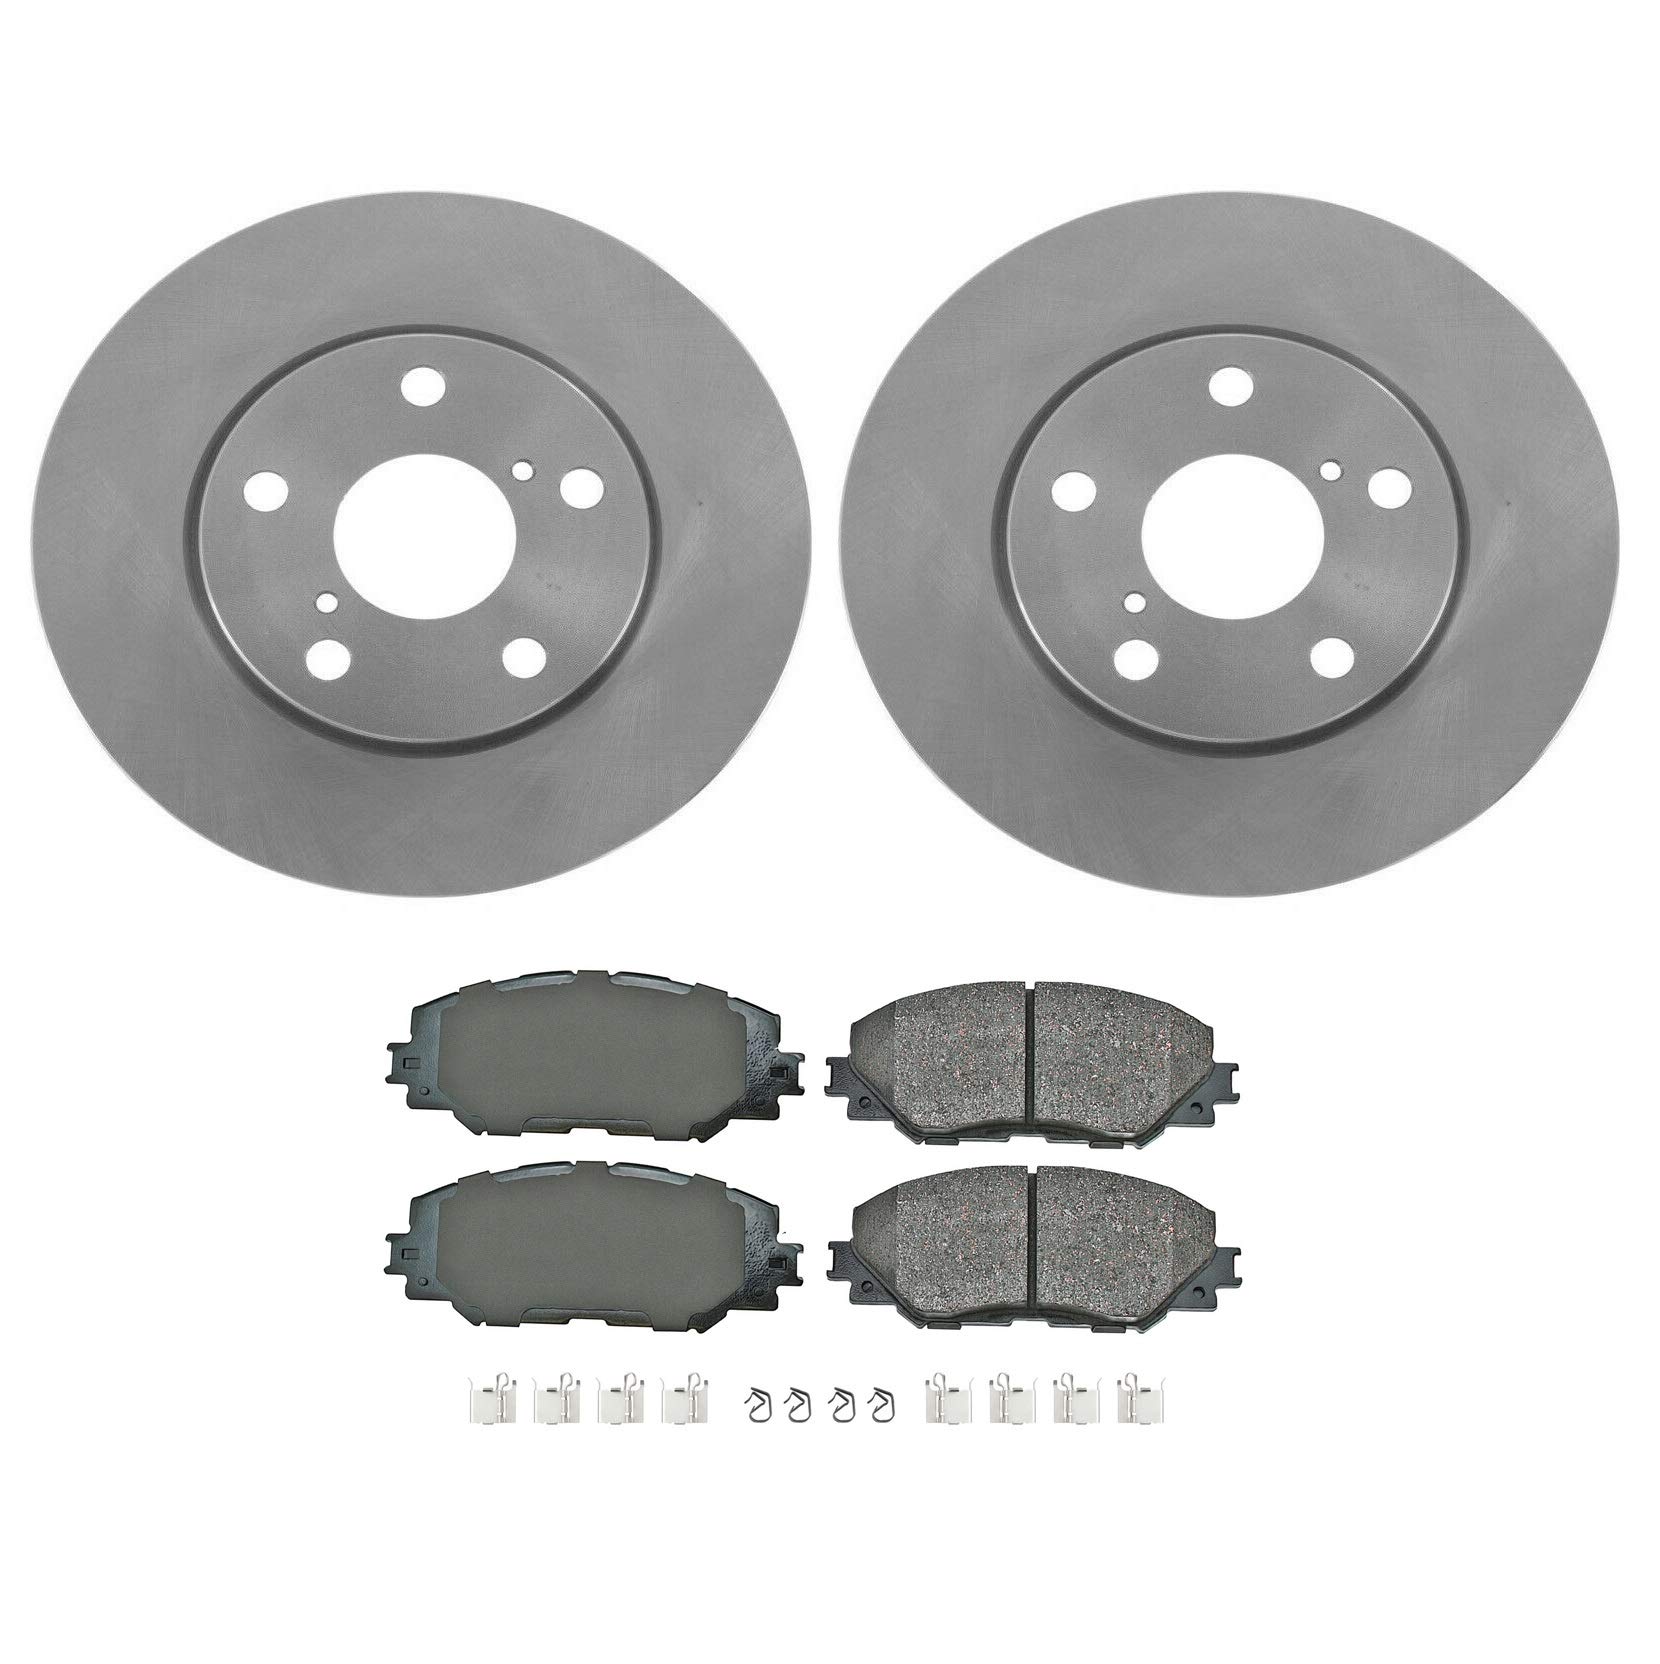 Akebono Front Brake Kit - ProACT Ceramic Slotted Pads Vented Grey Cast Iron 275mm 5 Lugs Disc Rotors For Toyota RAV4 Limited Base Sport LE 2.5L L4 ...